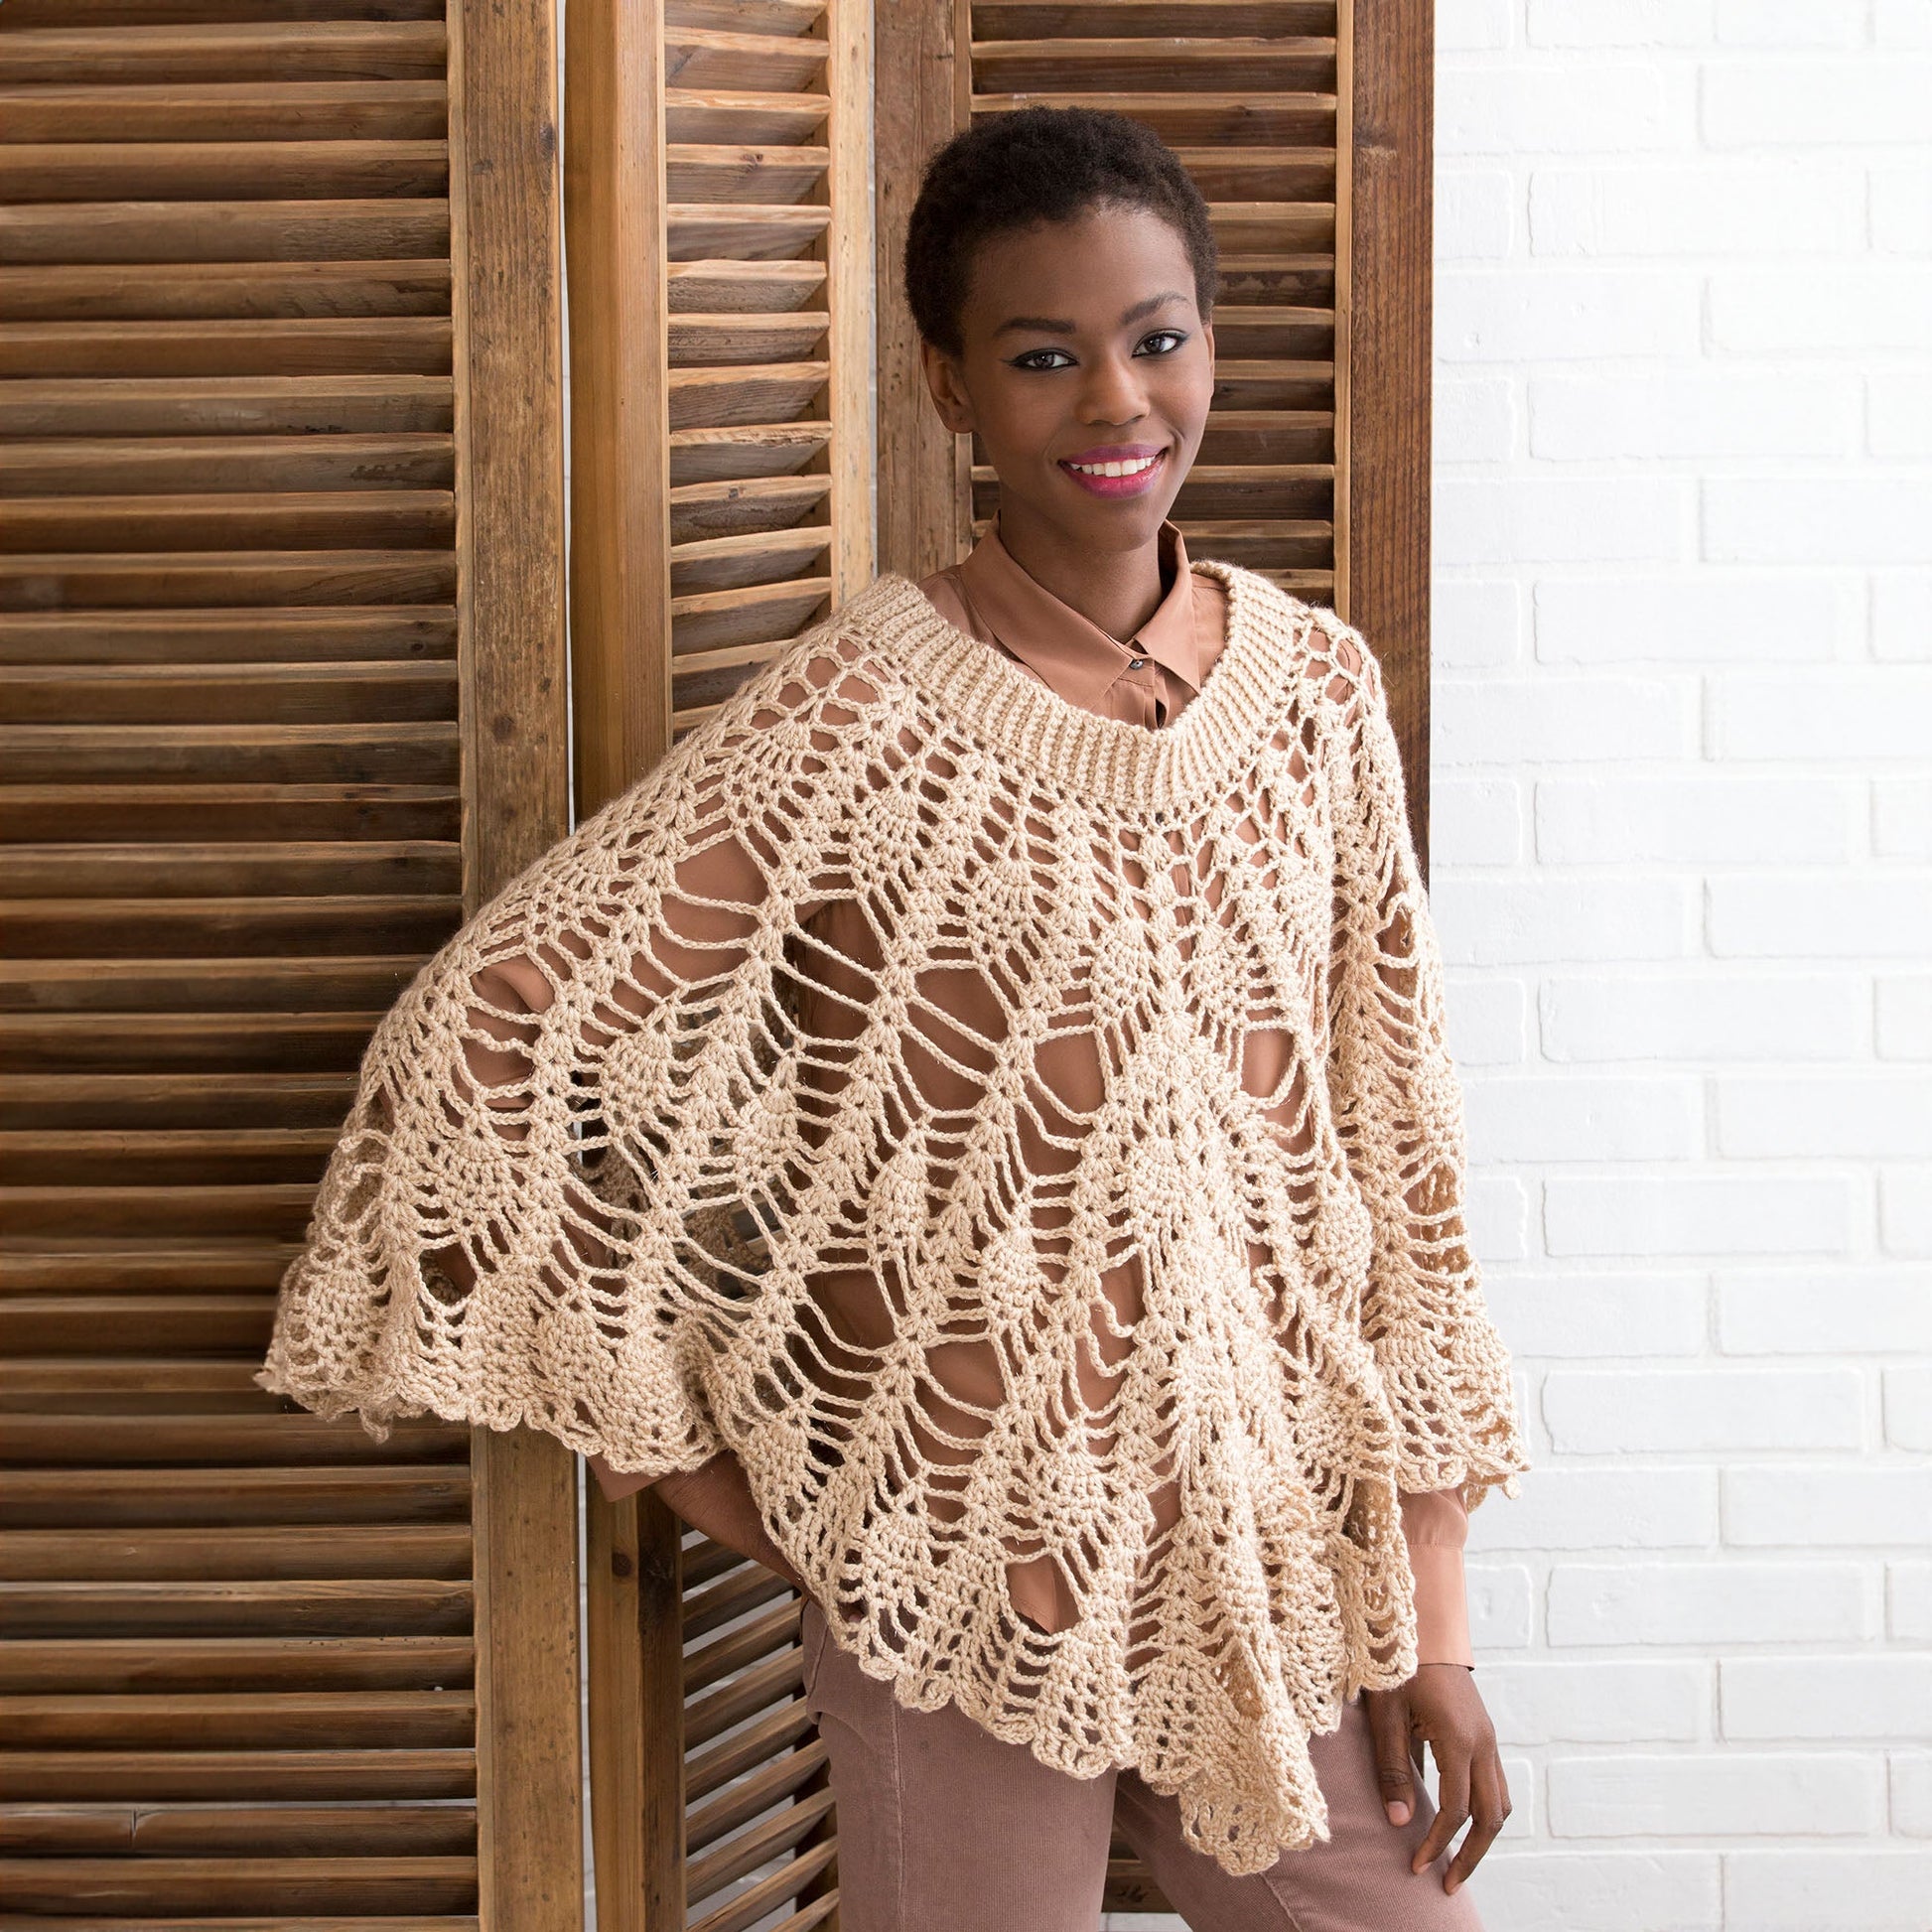 Free Red Heart Crochet Poetry Poncho Pattern